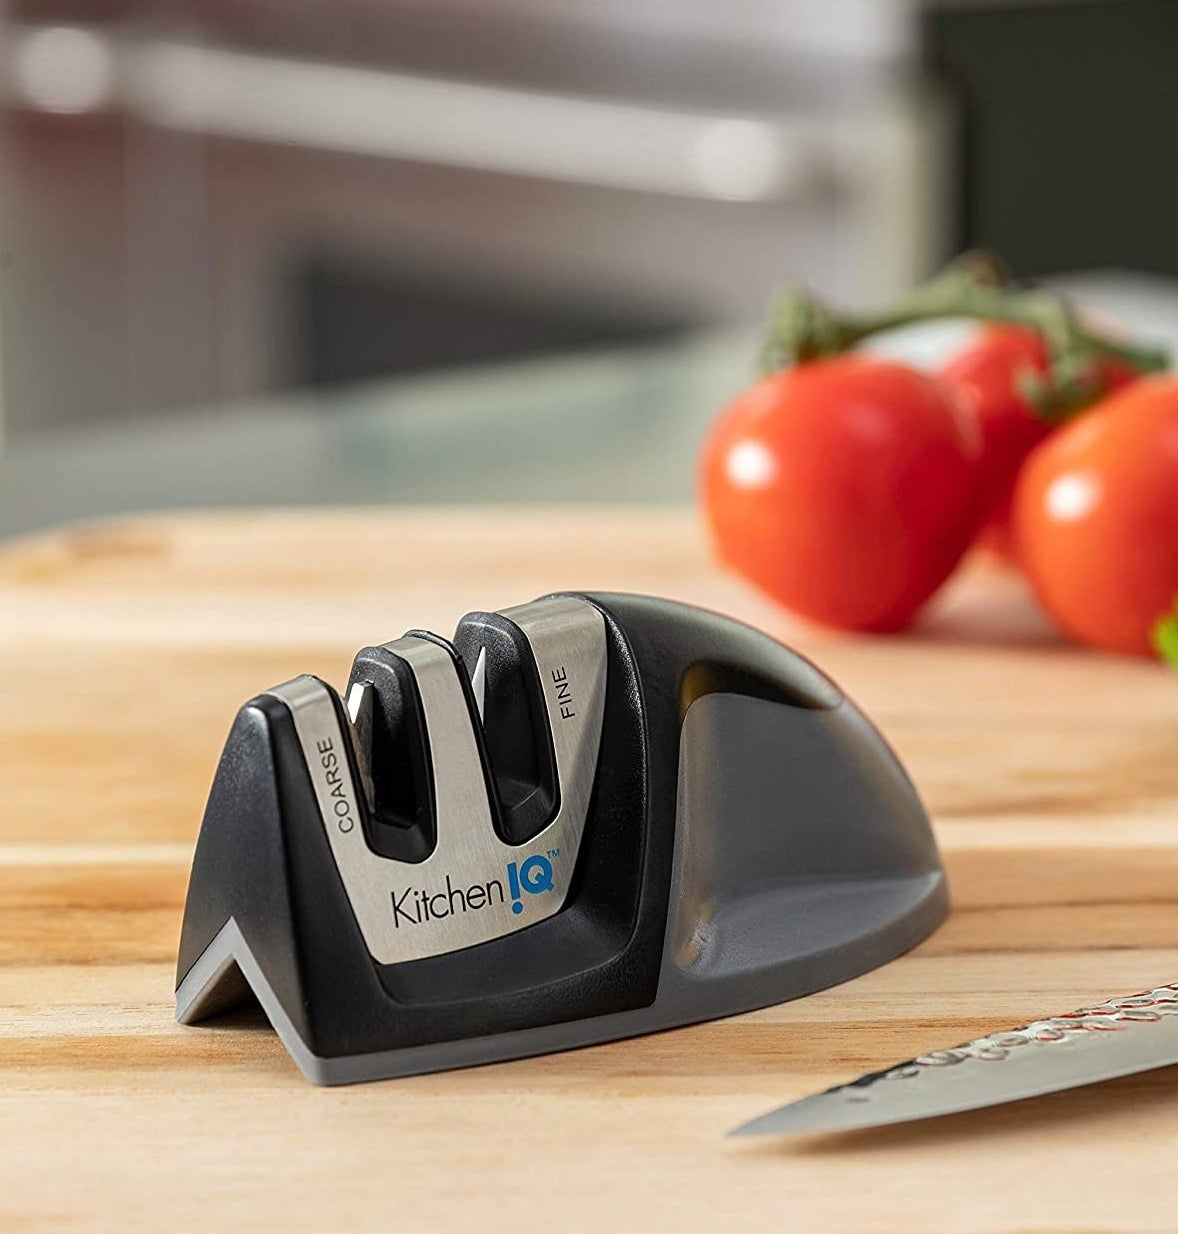 The knife sharpener on a wood cutting board next to a knife and some tomatoes